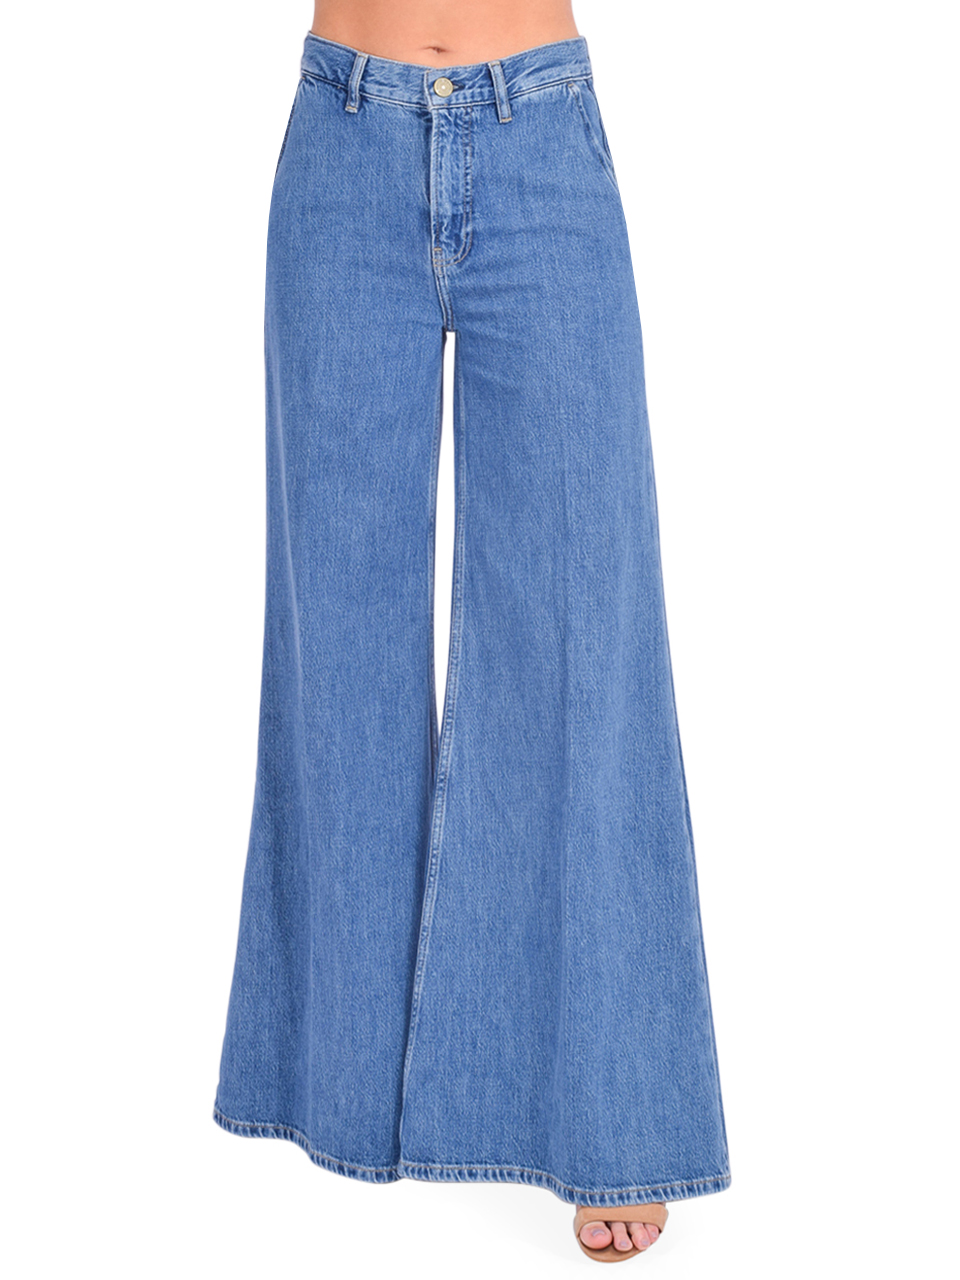 FRAME The Extra Wide Leg Jean in Ocean Drive Front View